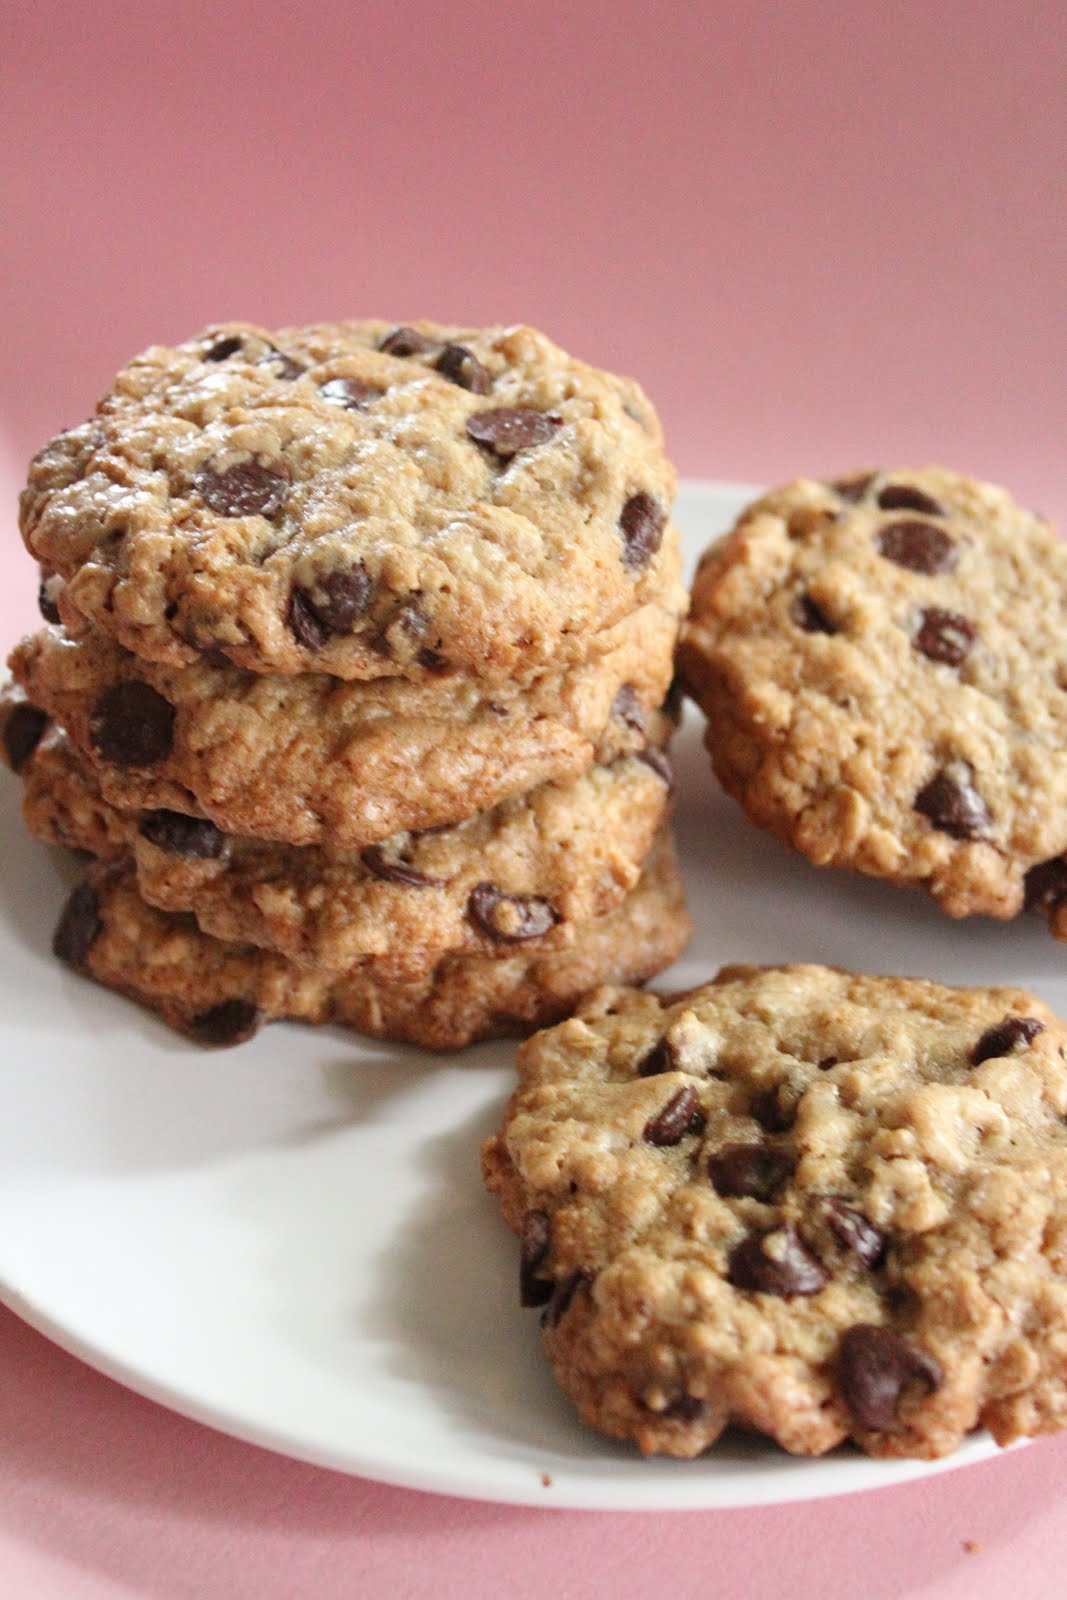 Ultimate healthier oatmeal and chocolate chip cookies